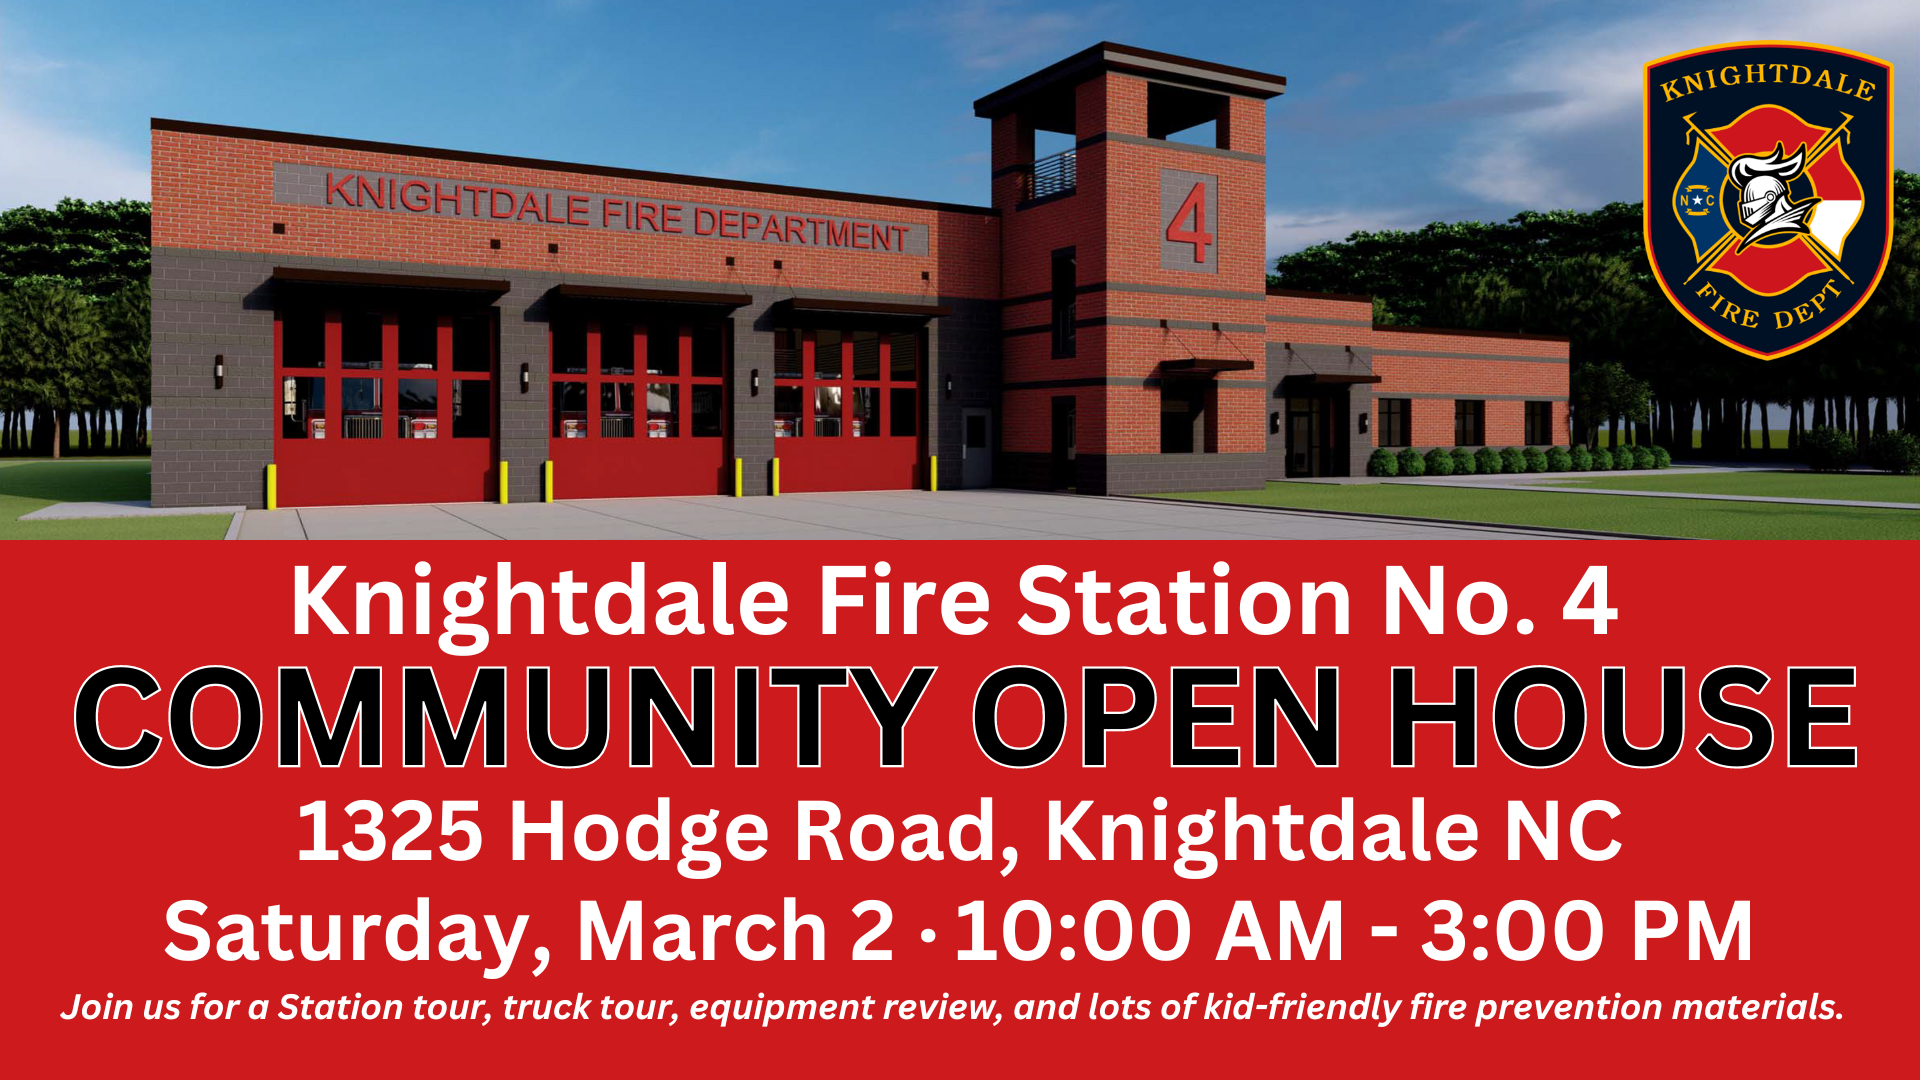 Knightdale Fire Station No. 4 Community Open House